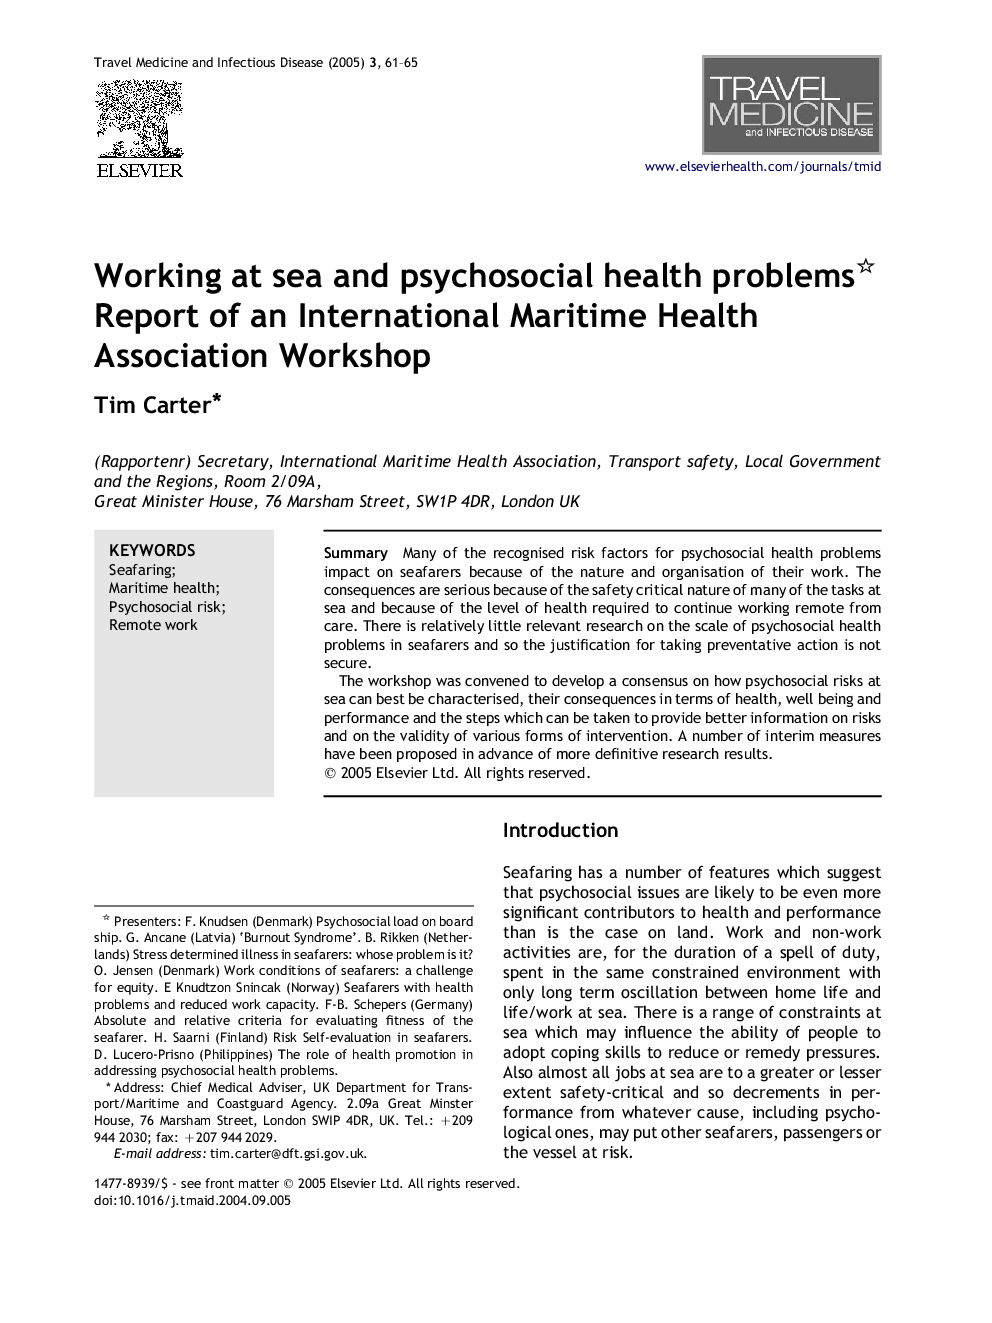 Working at sea and psychosocial health problems